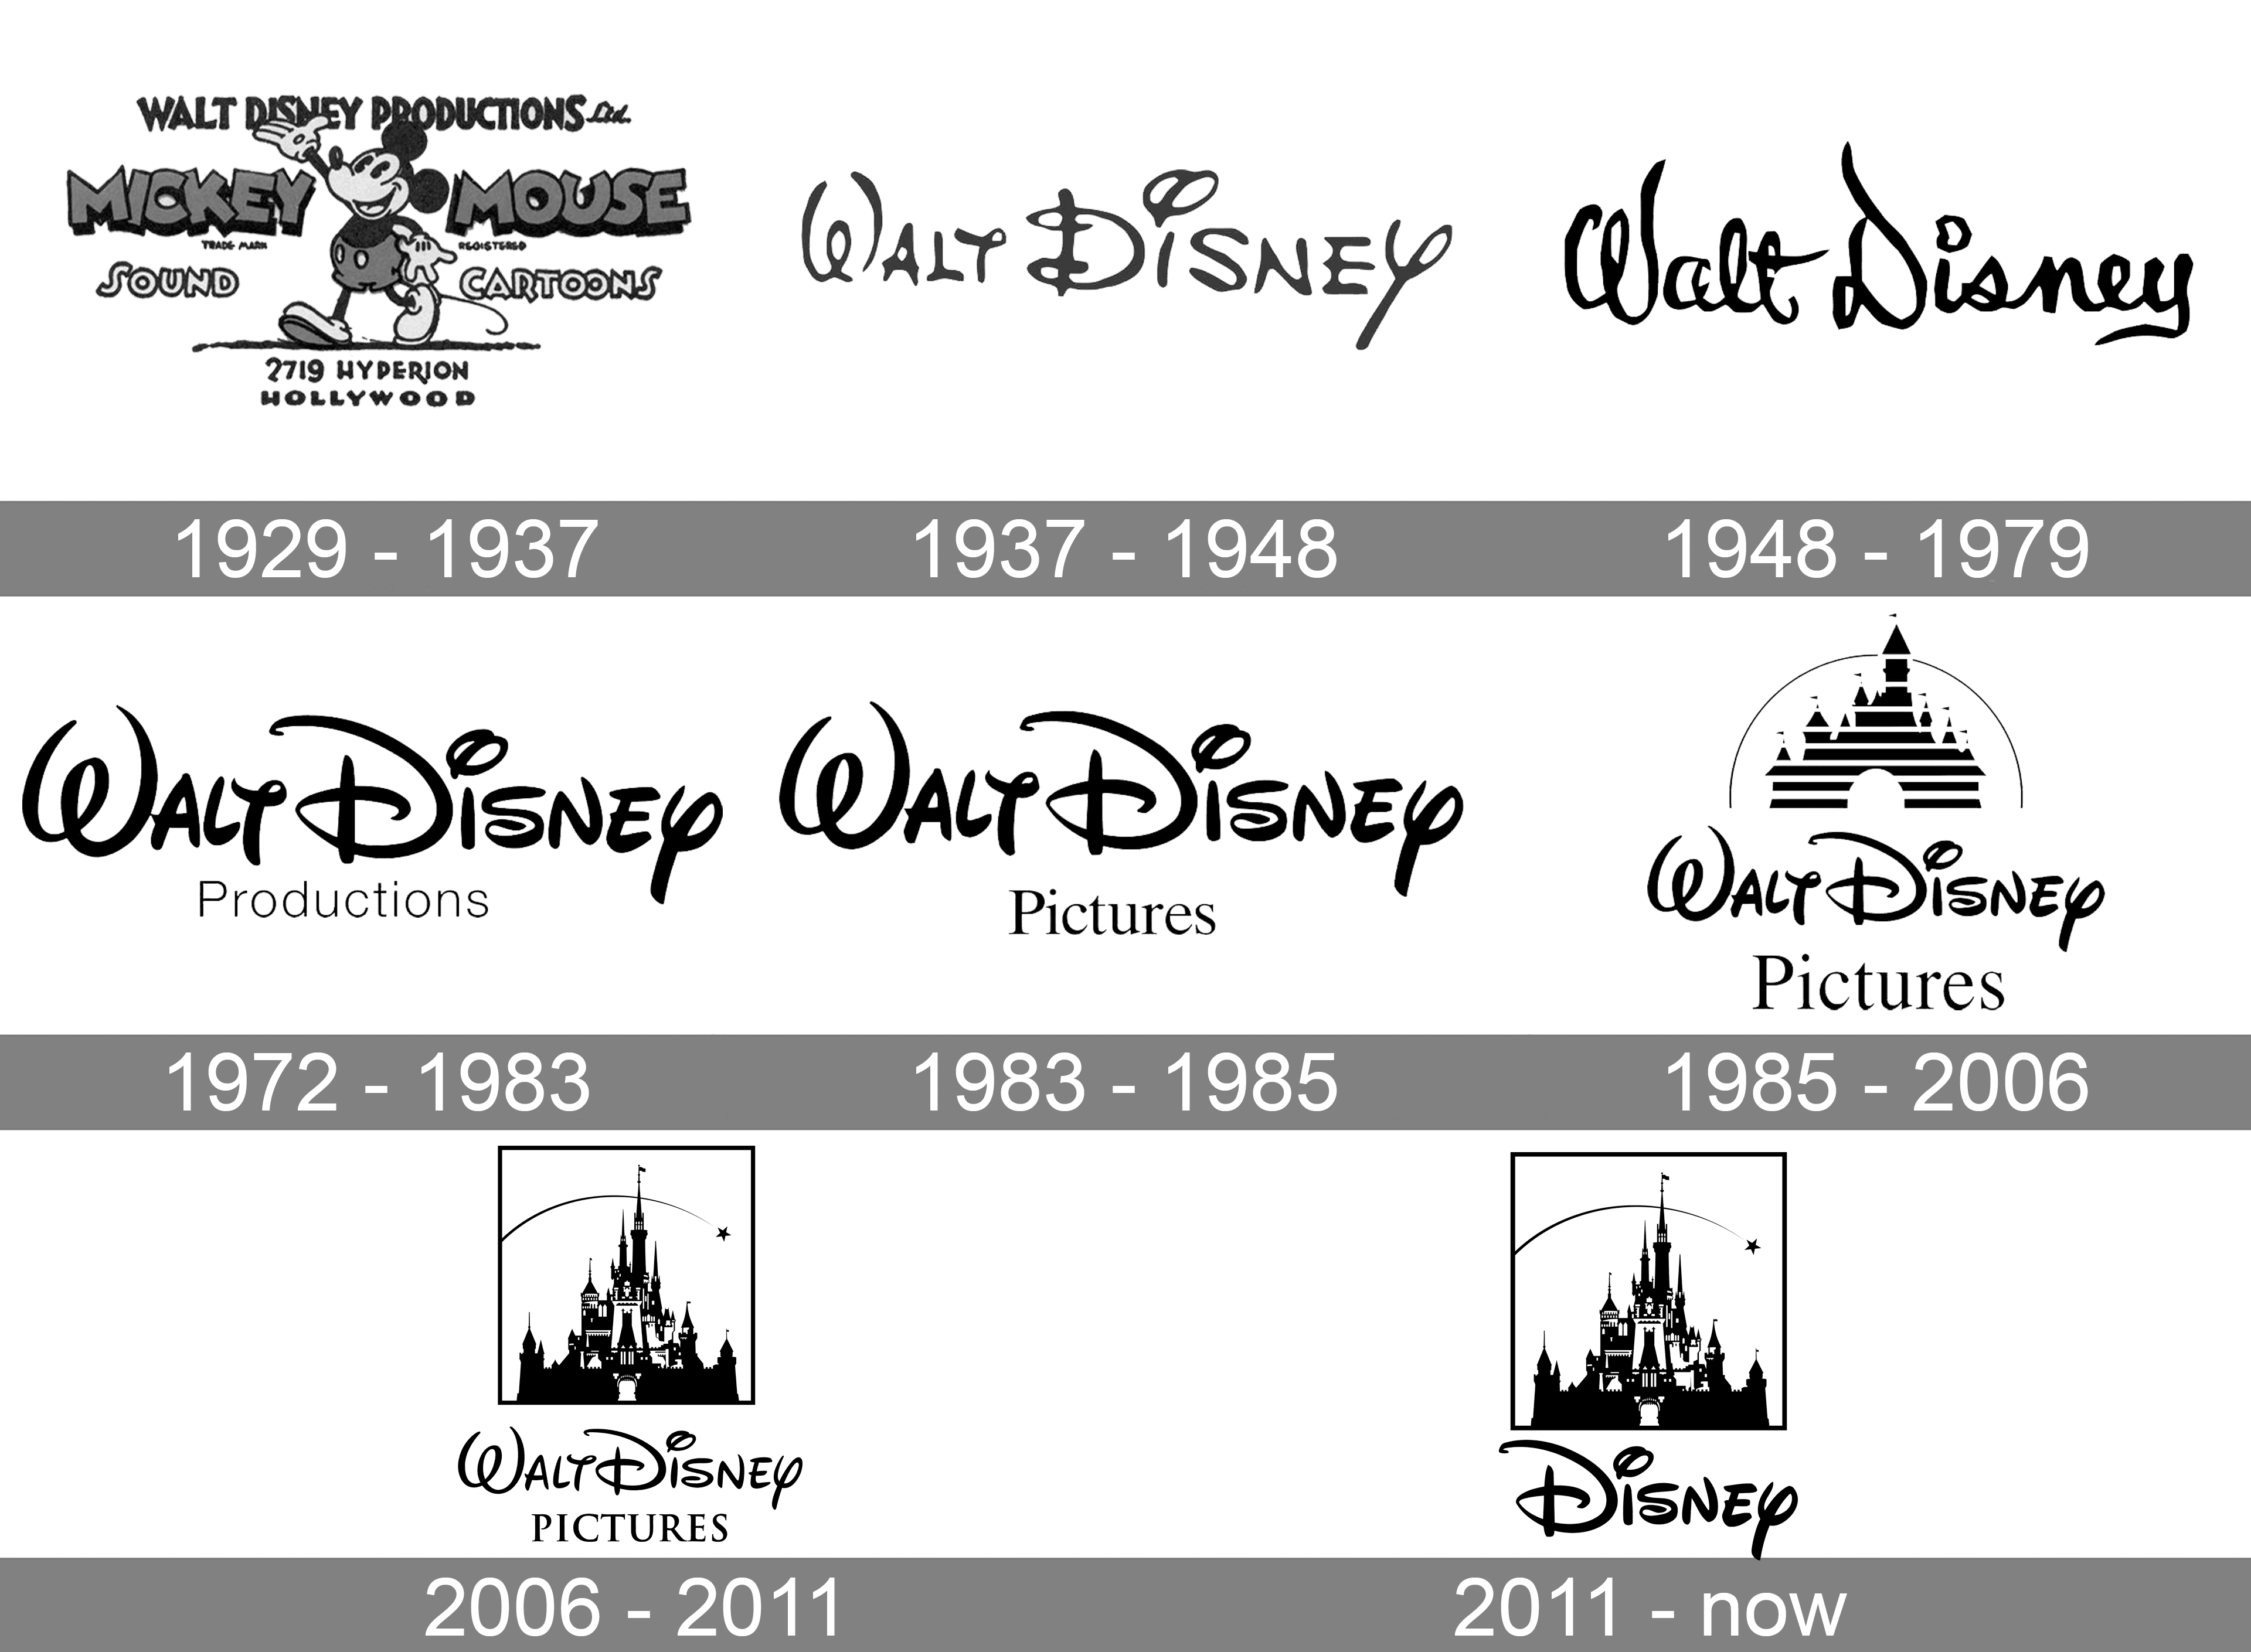 Walt Disney logo and symbol, meaning, history, PNG, brand